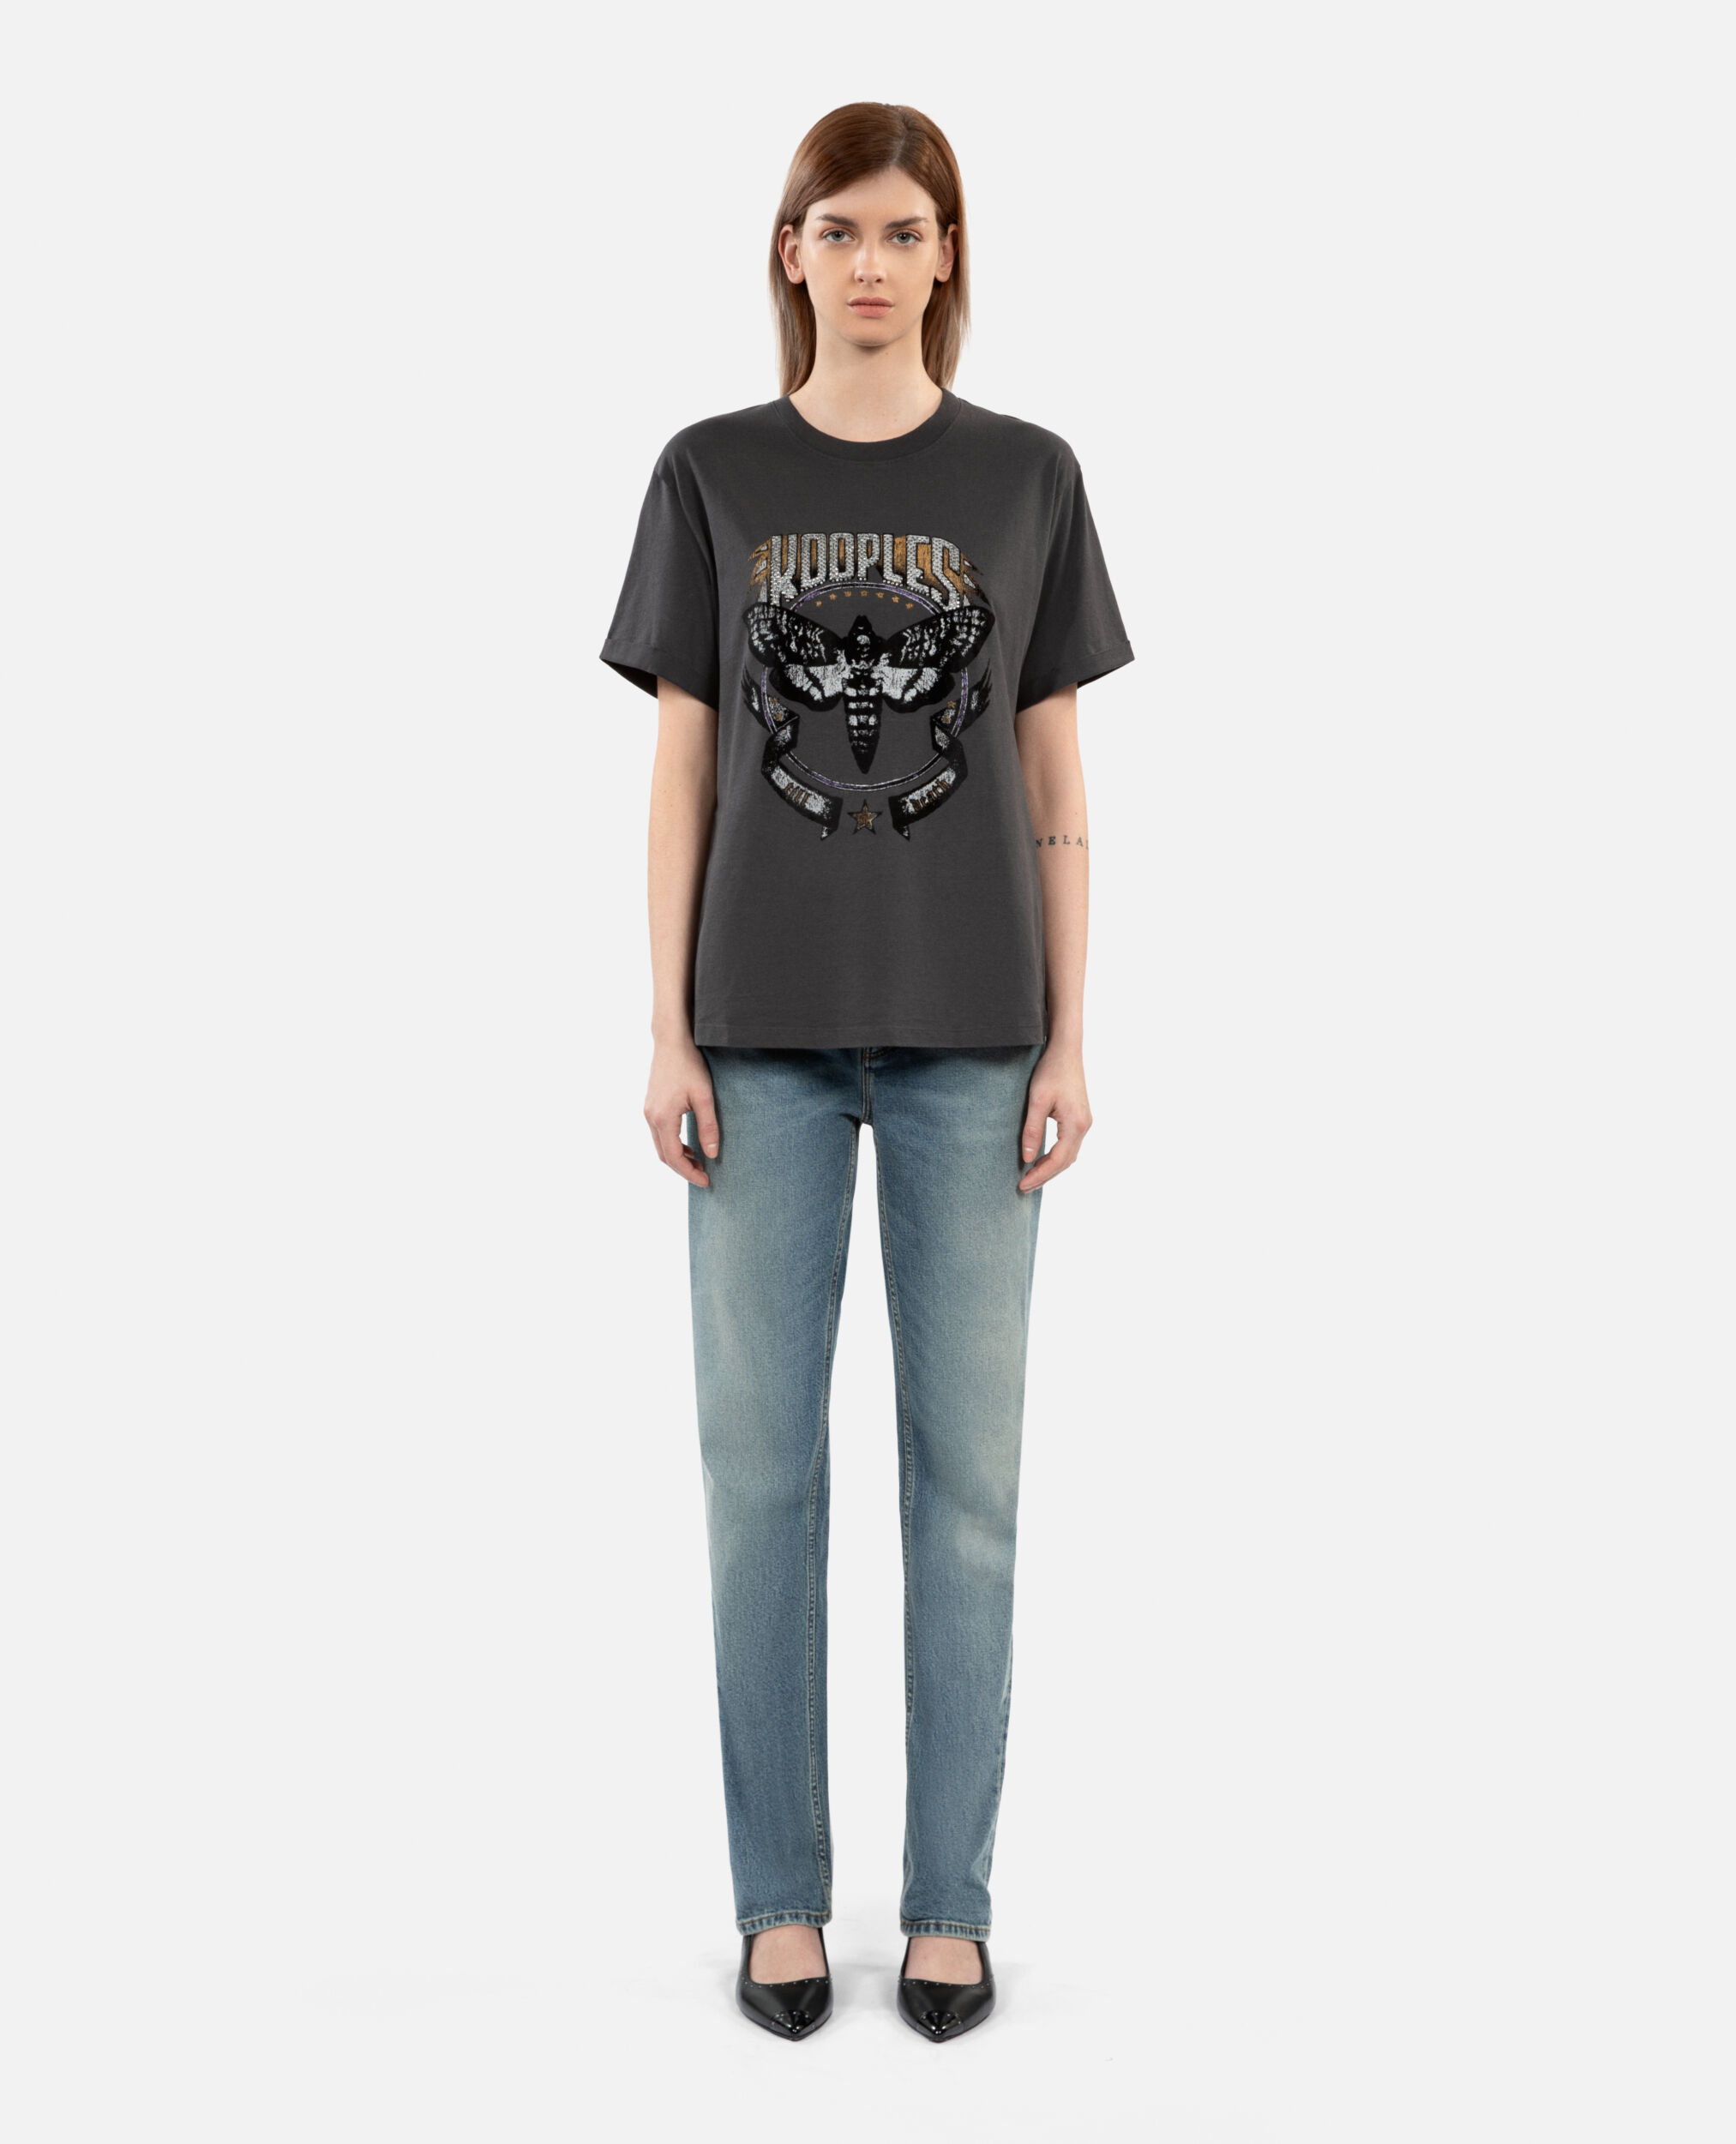 Camiseta mujer gris carbono Skull butterfly, CARBONE, hi-res image number null